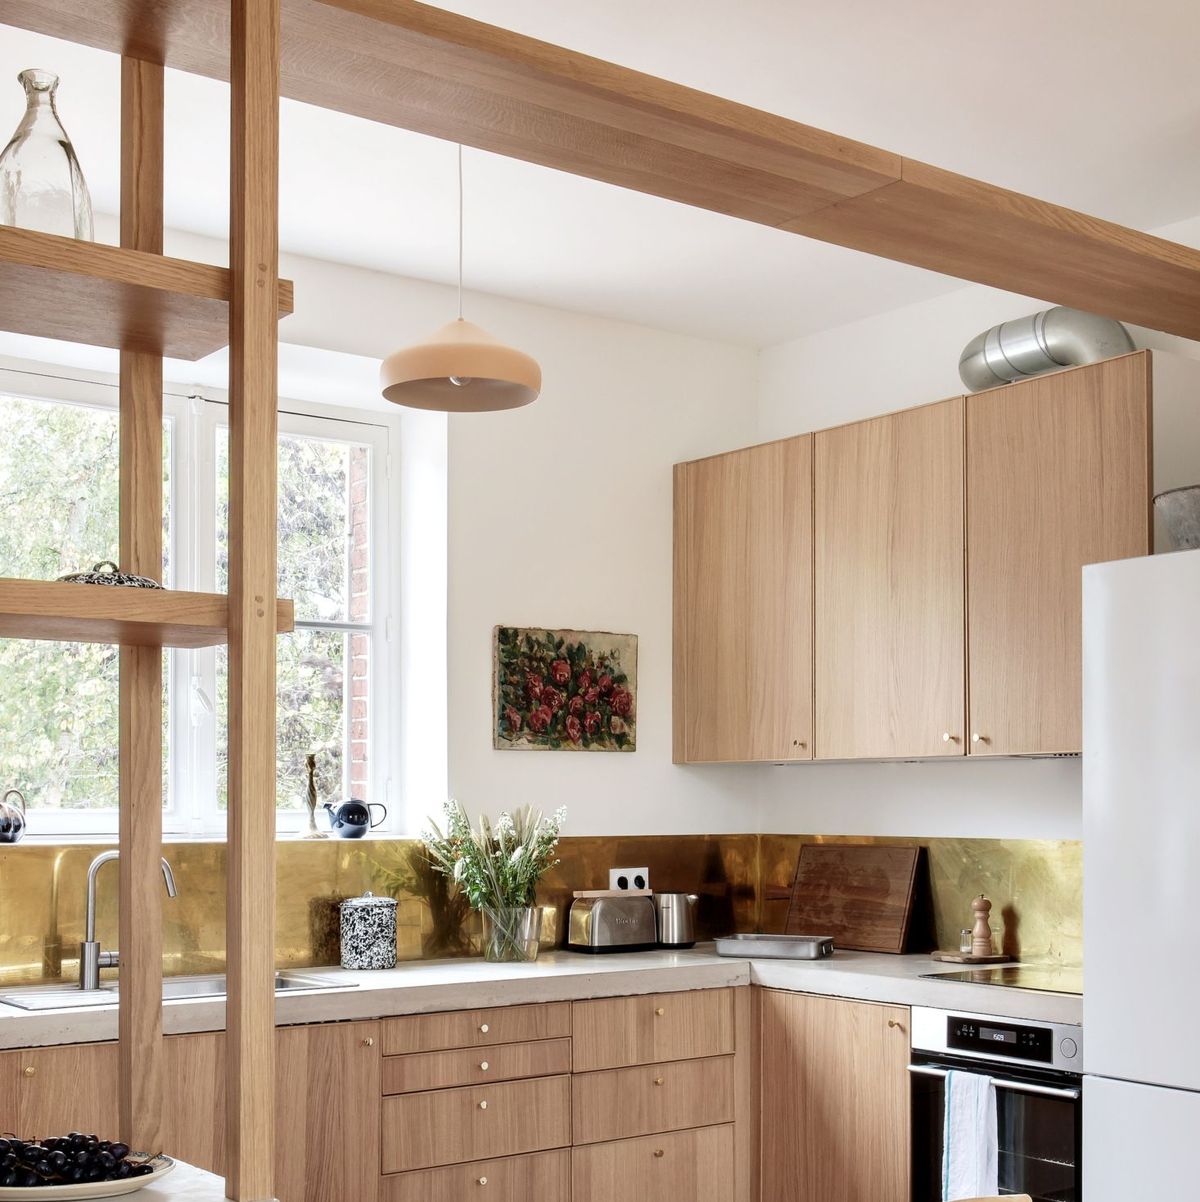 Elevate Your Kitchen Style: Stunning Oak Shelving Ideas to Inspire You